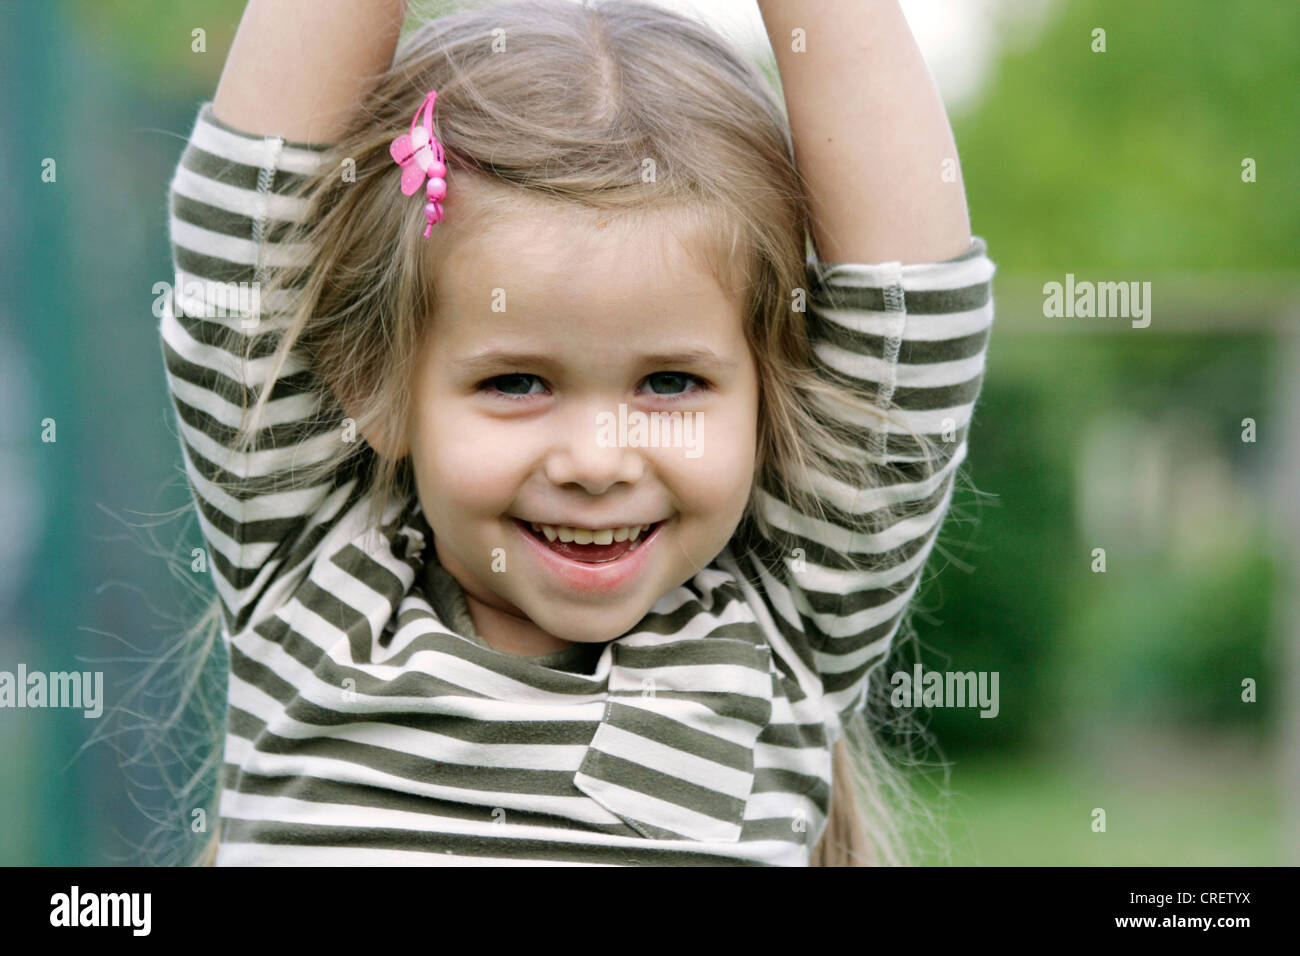 small blond, smiling girl having fun, Germany Stock Photo